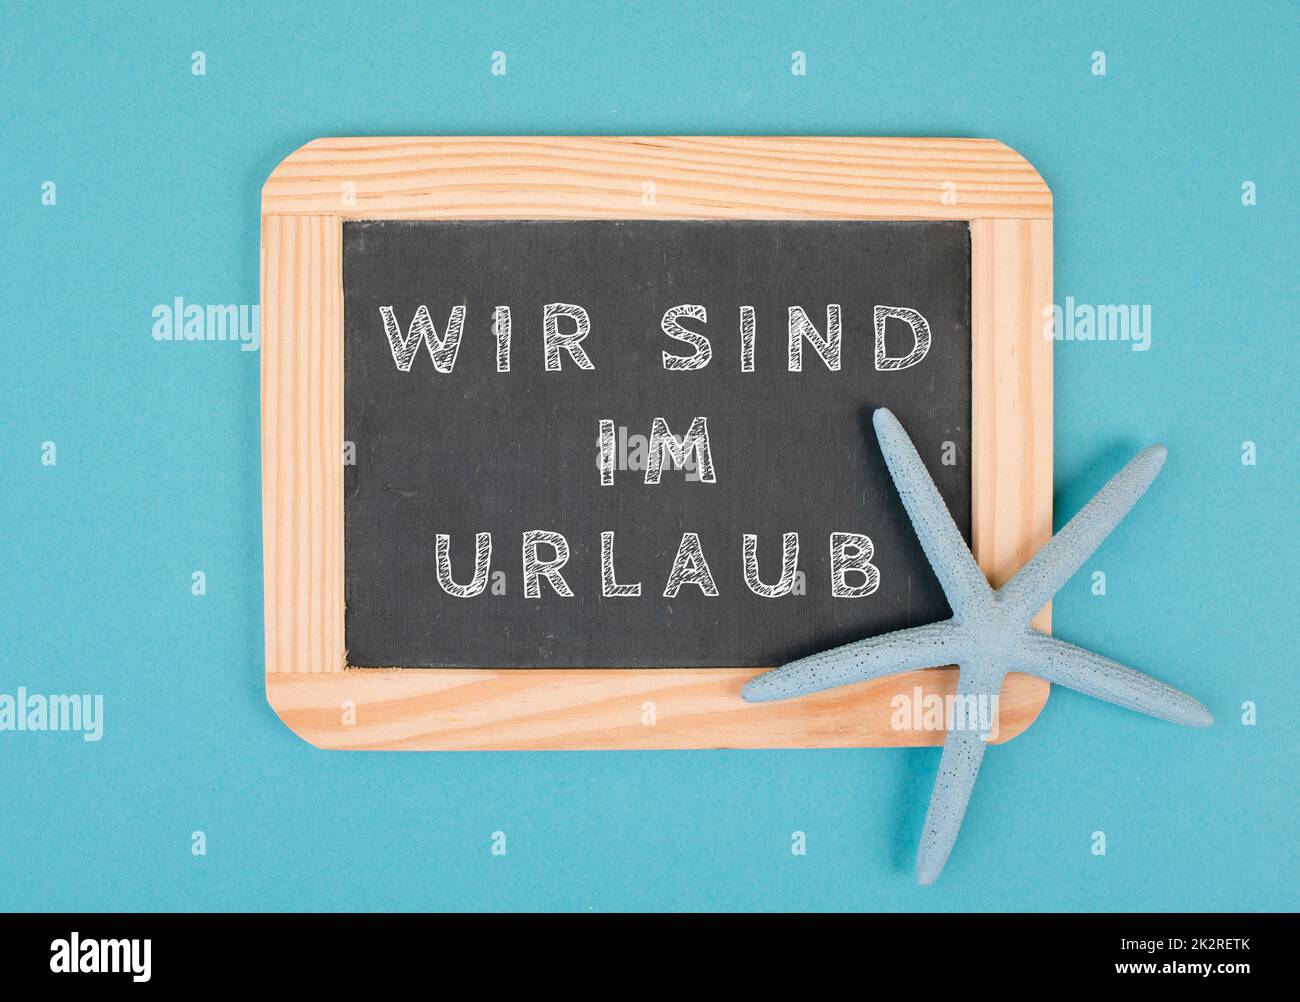 We are on vacation is standing in german language on the chalkboard with a sea star, holiday background, time out in summer, hot weather, advertising and marketing concept Stock Photo